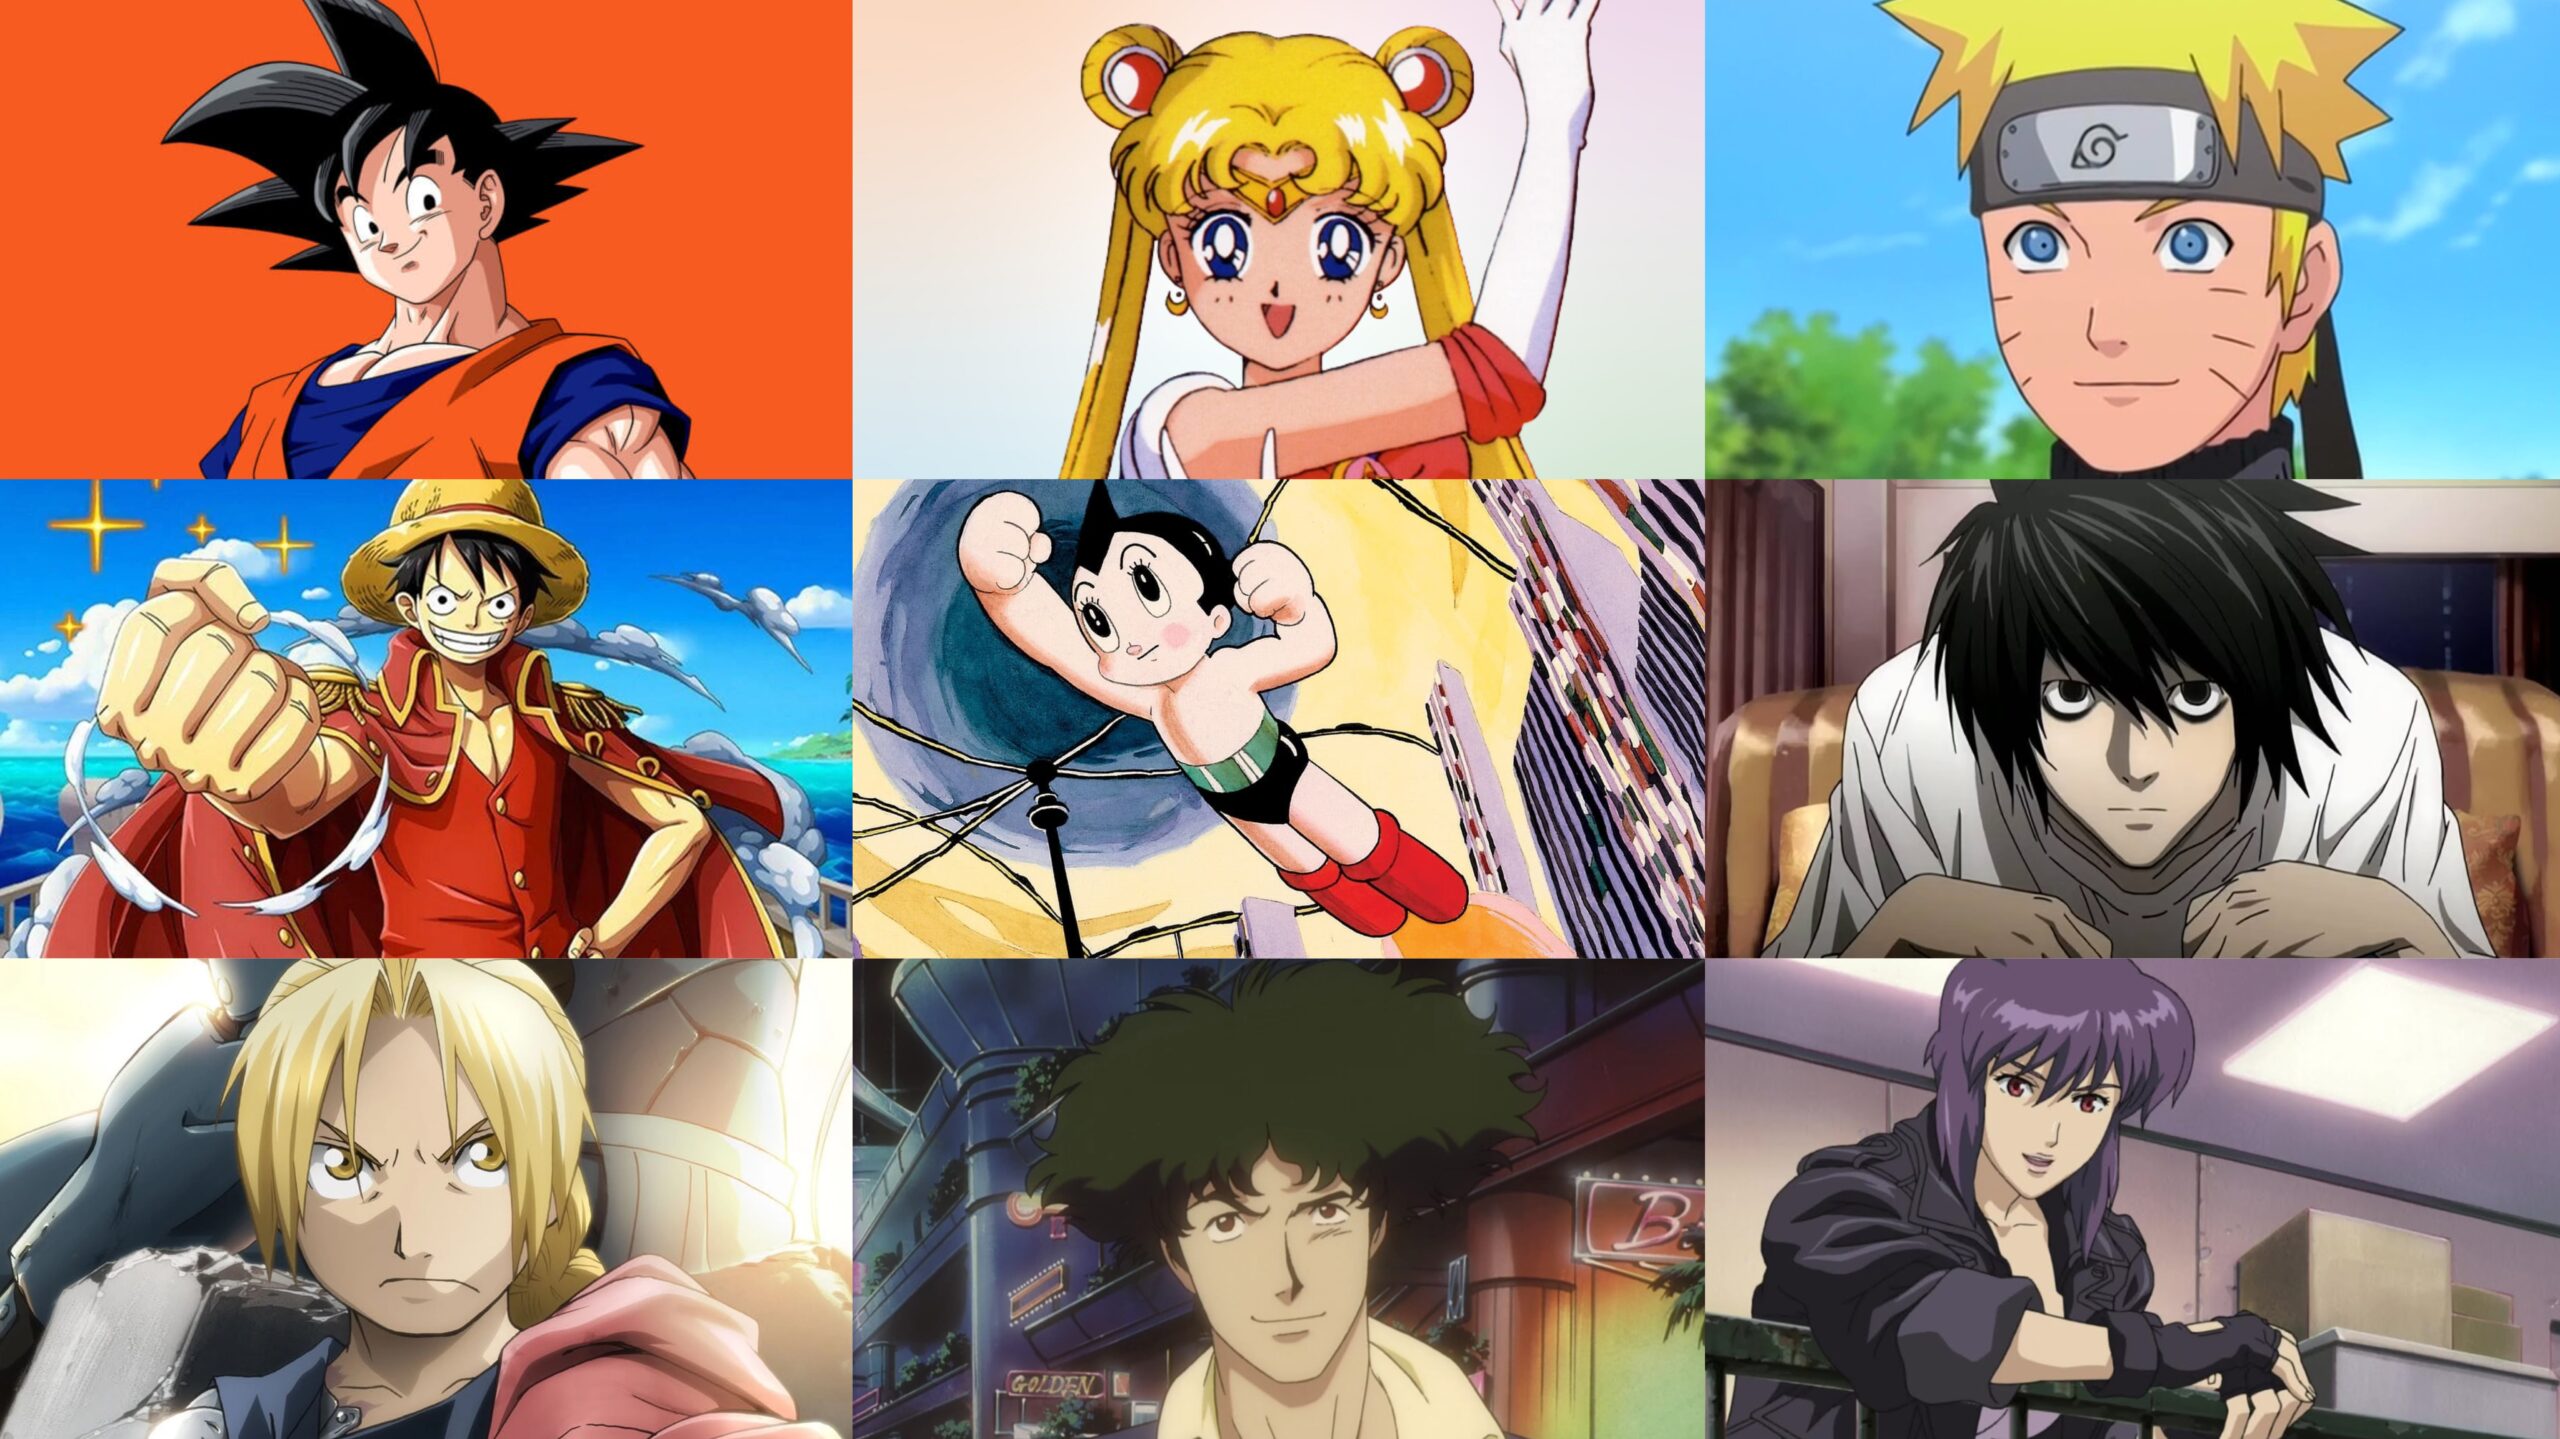 10 Anime Characters With The Power To Possess Others